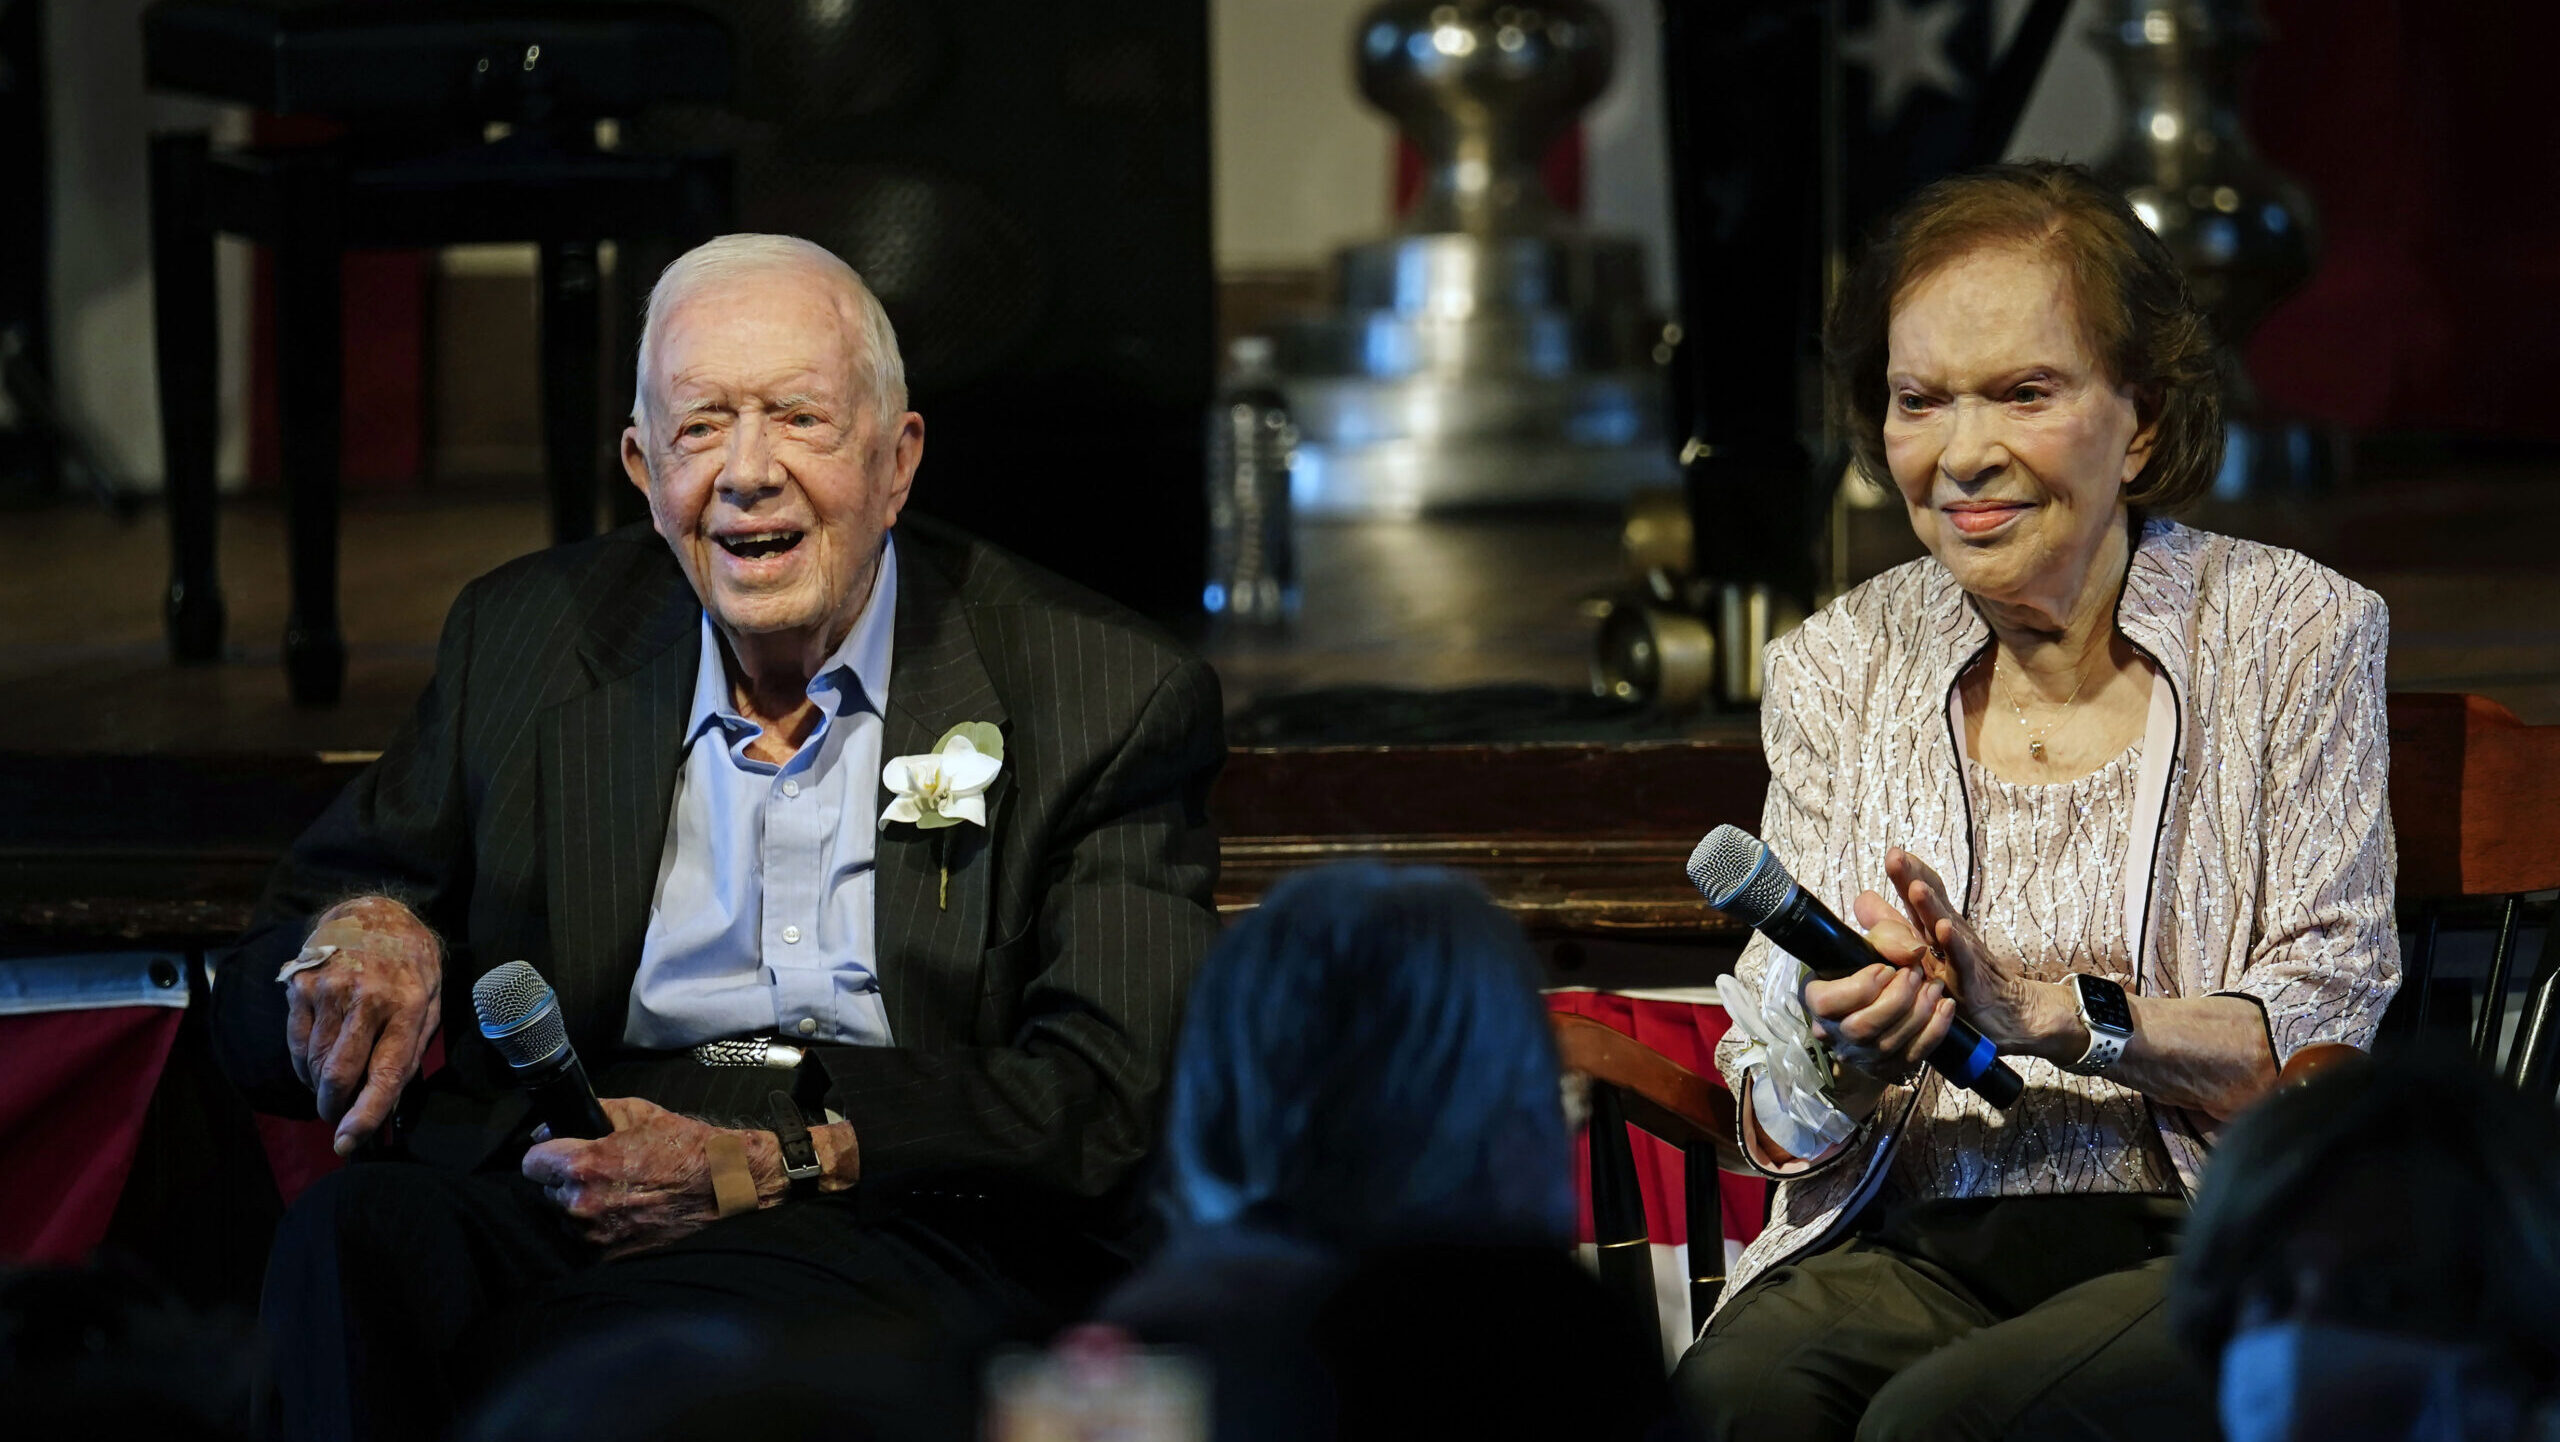 Former U.S. President Jimmy Carter and his wife, former first lady Rosalynn Carter, sit together du...